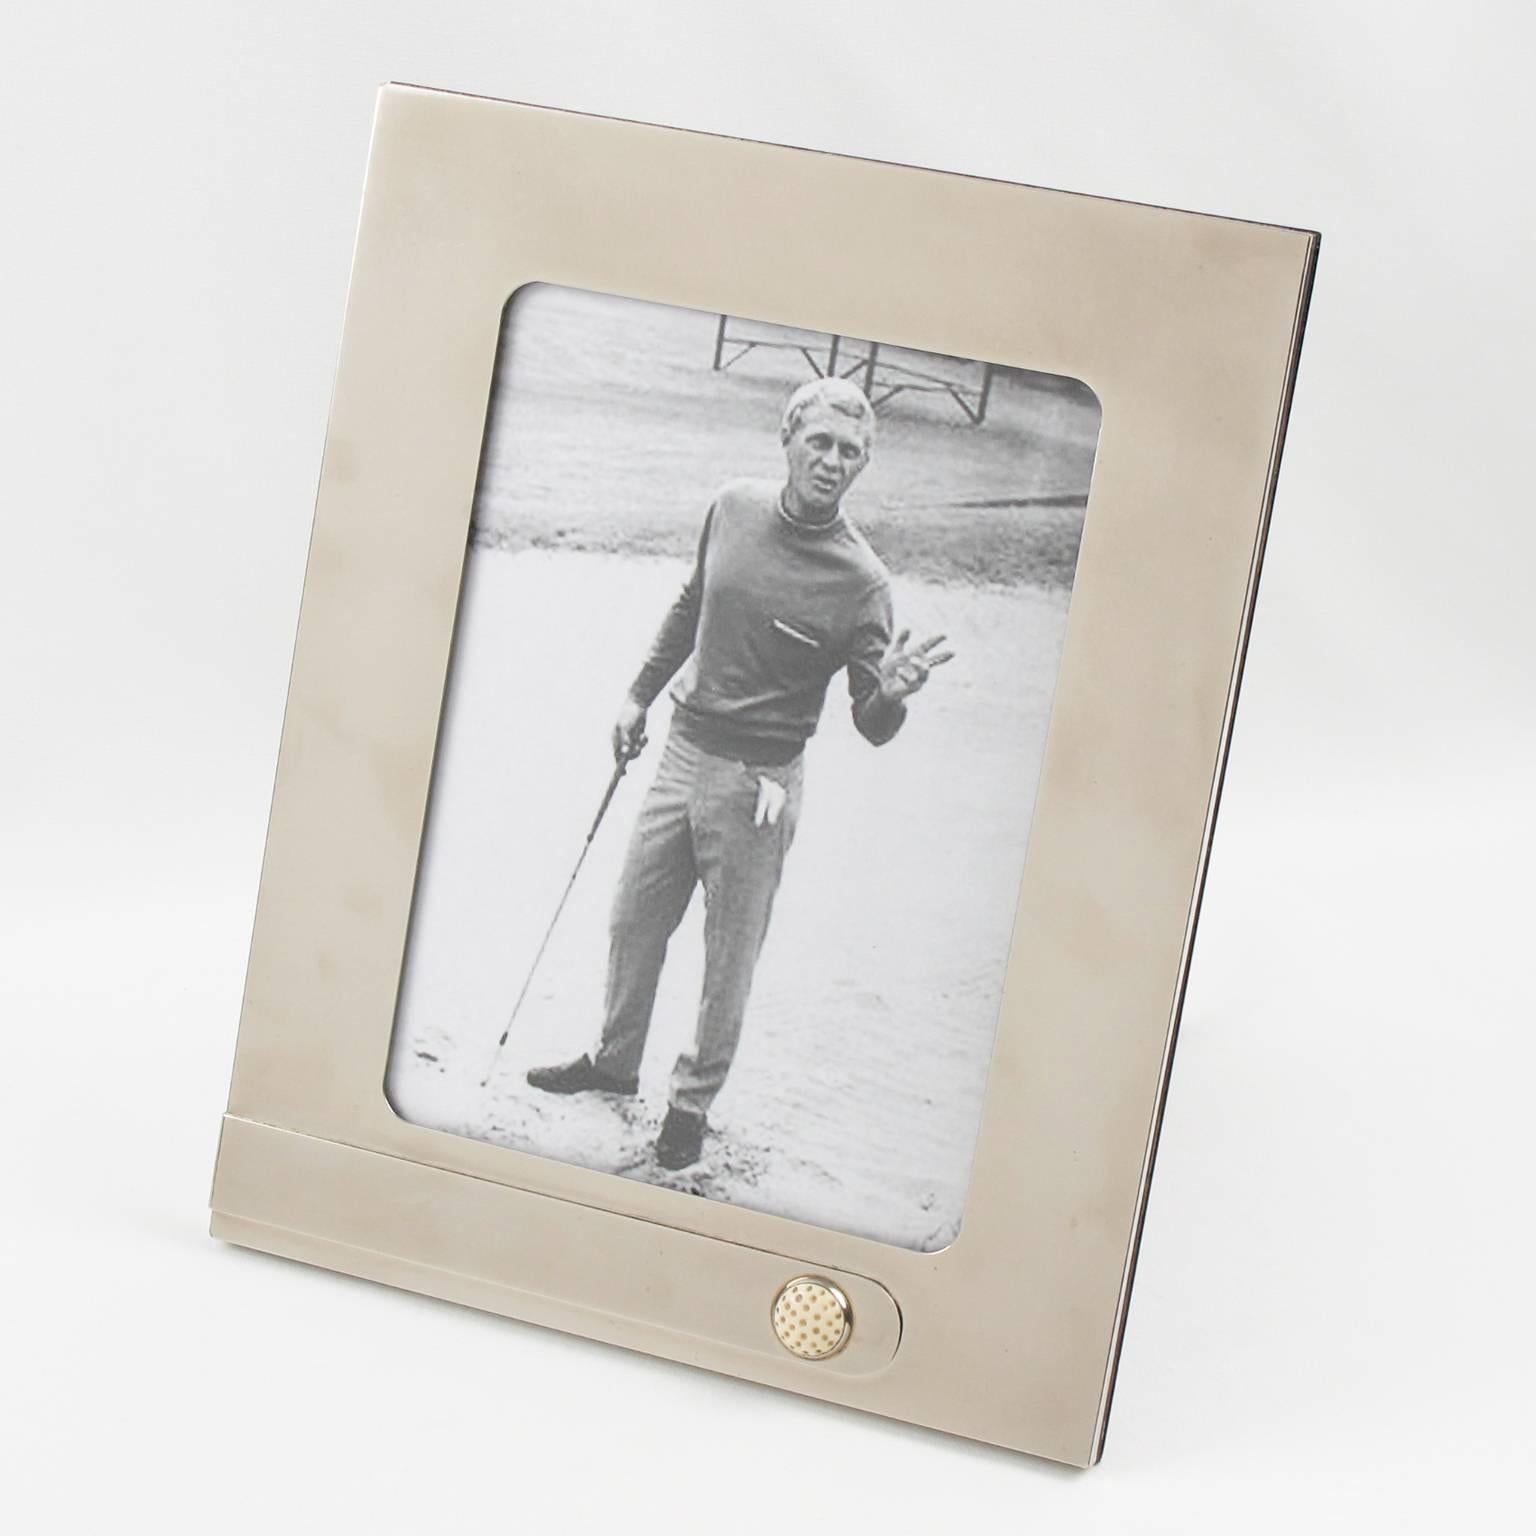 Classic and iconic vintage picture photo frame by Italian designer Gucci. Timeless and elegant polished silver plate with bone golf ball design. Rich high gloss walnut wood back and easel. Marked on side: Gucci - made in Italy. Perfect size frame.